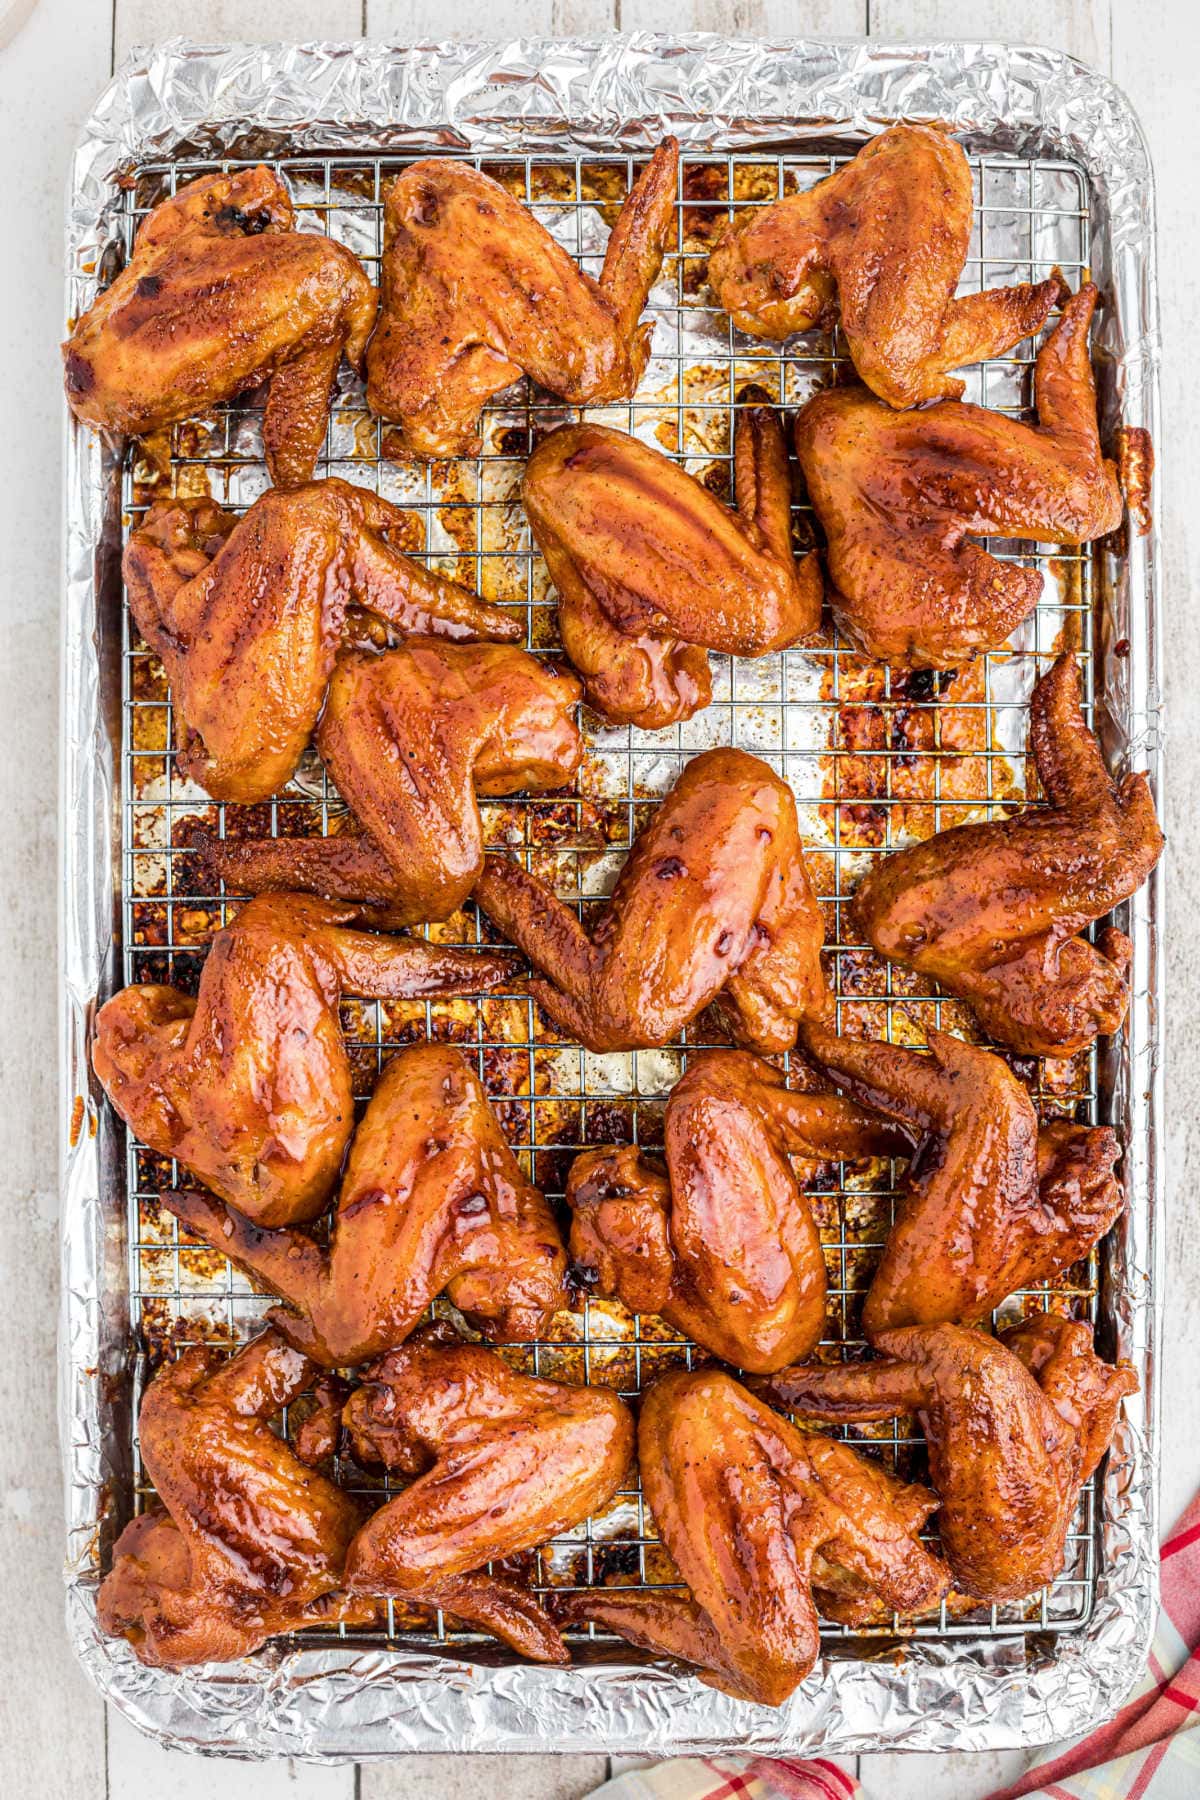 Overhead view of baked wings that have been dipped in glaze.